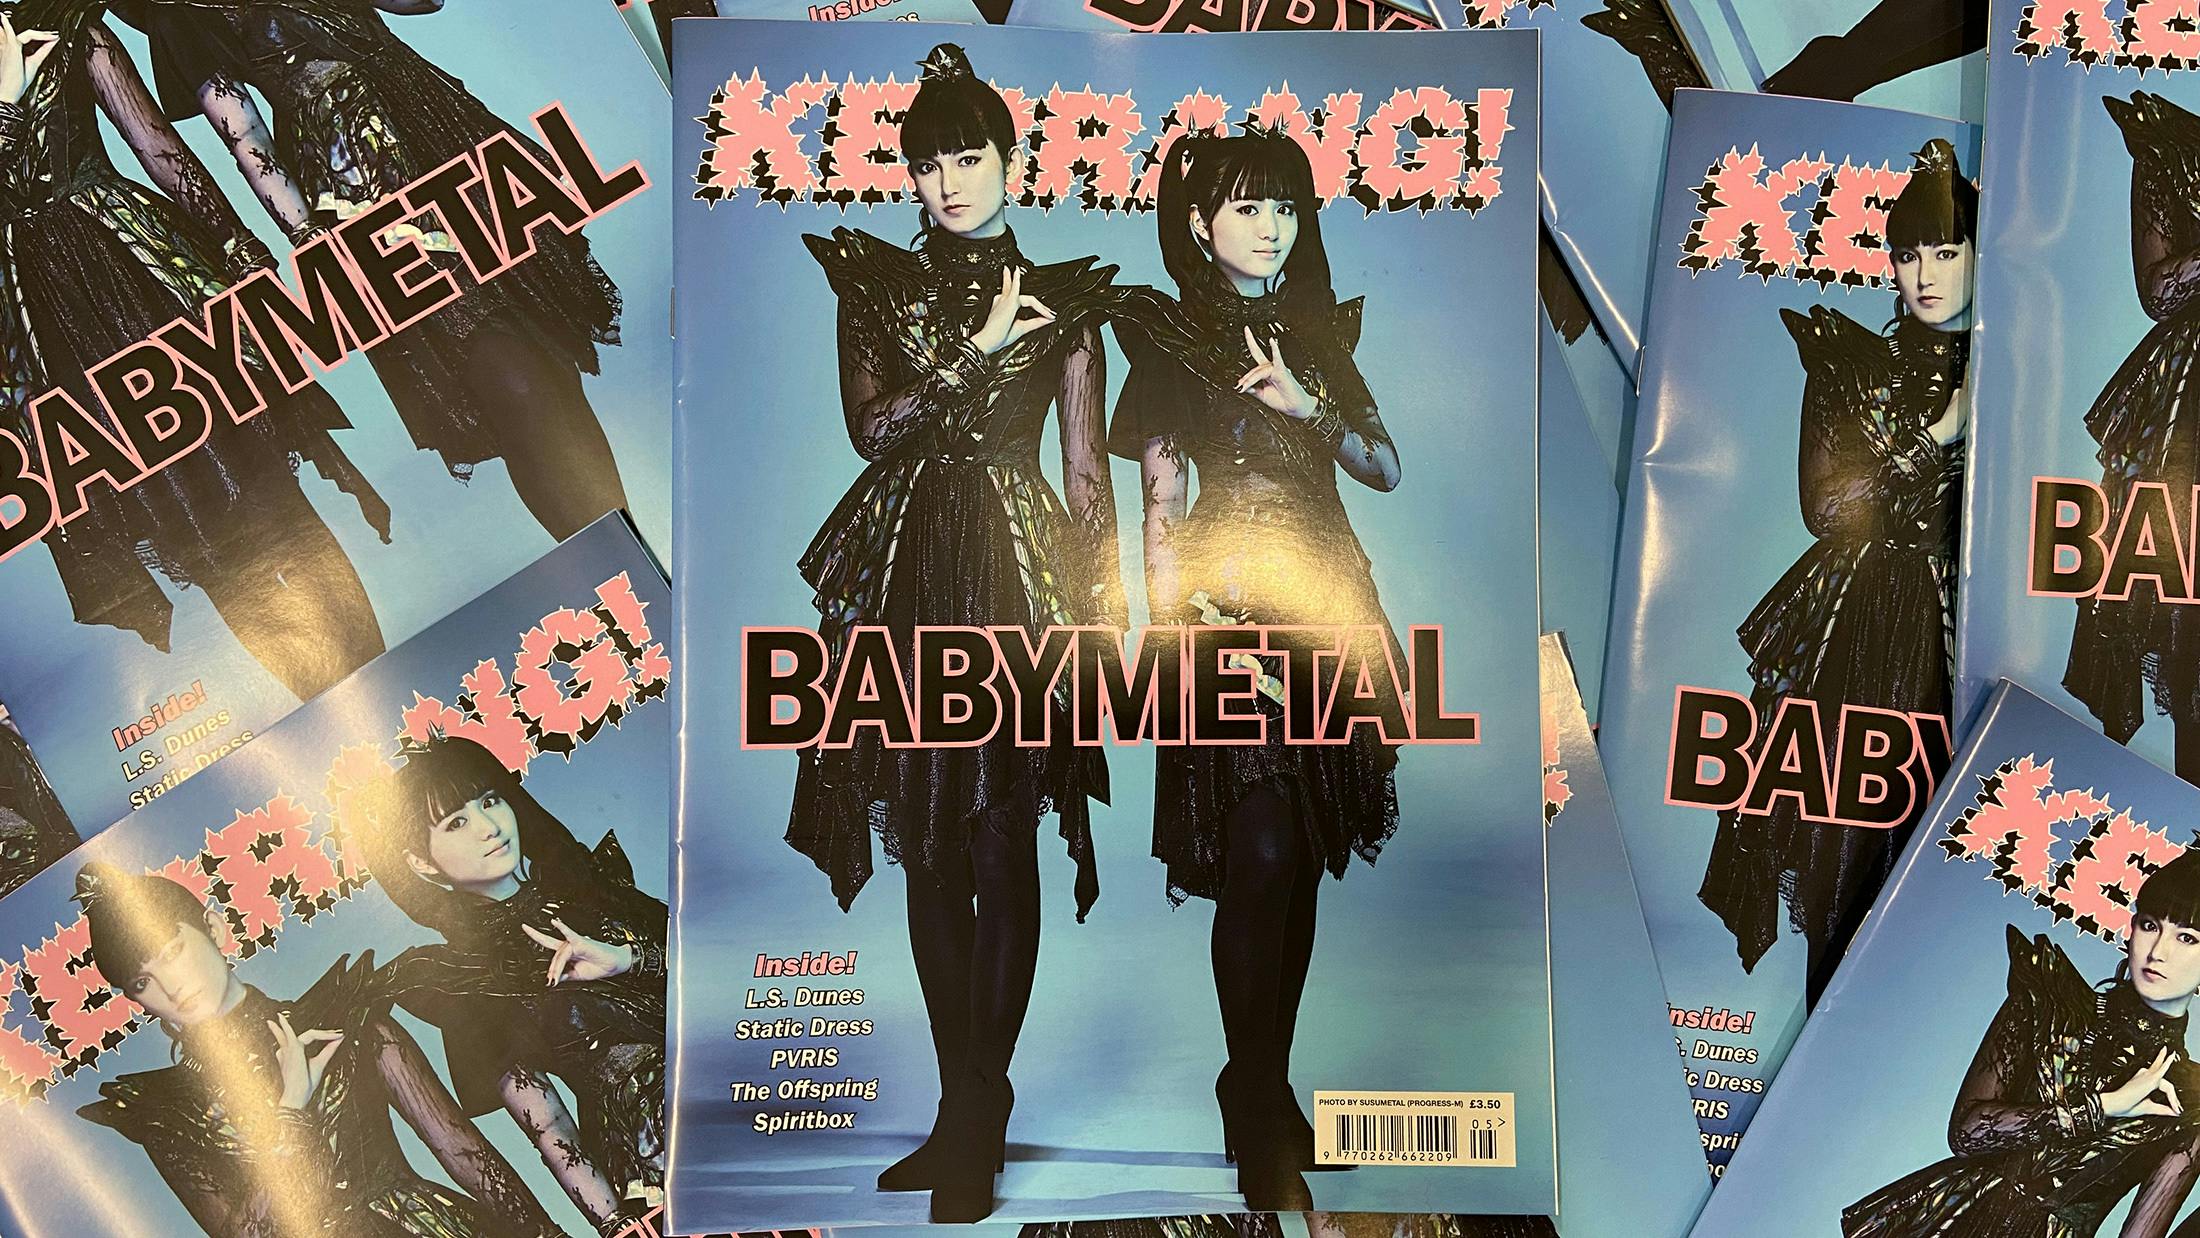 The phenomenon returns: BABYMETAL take us inside their new era – only in the new issue of Kerrang! magazine